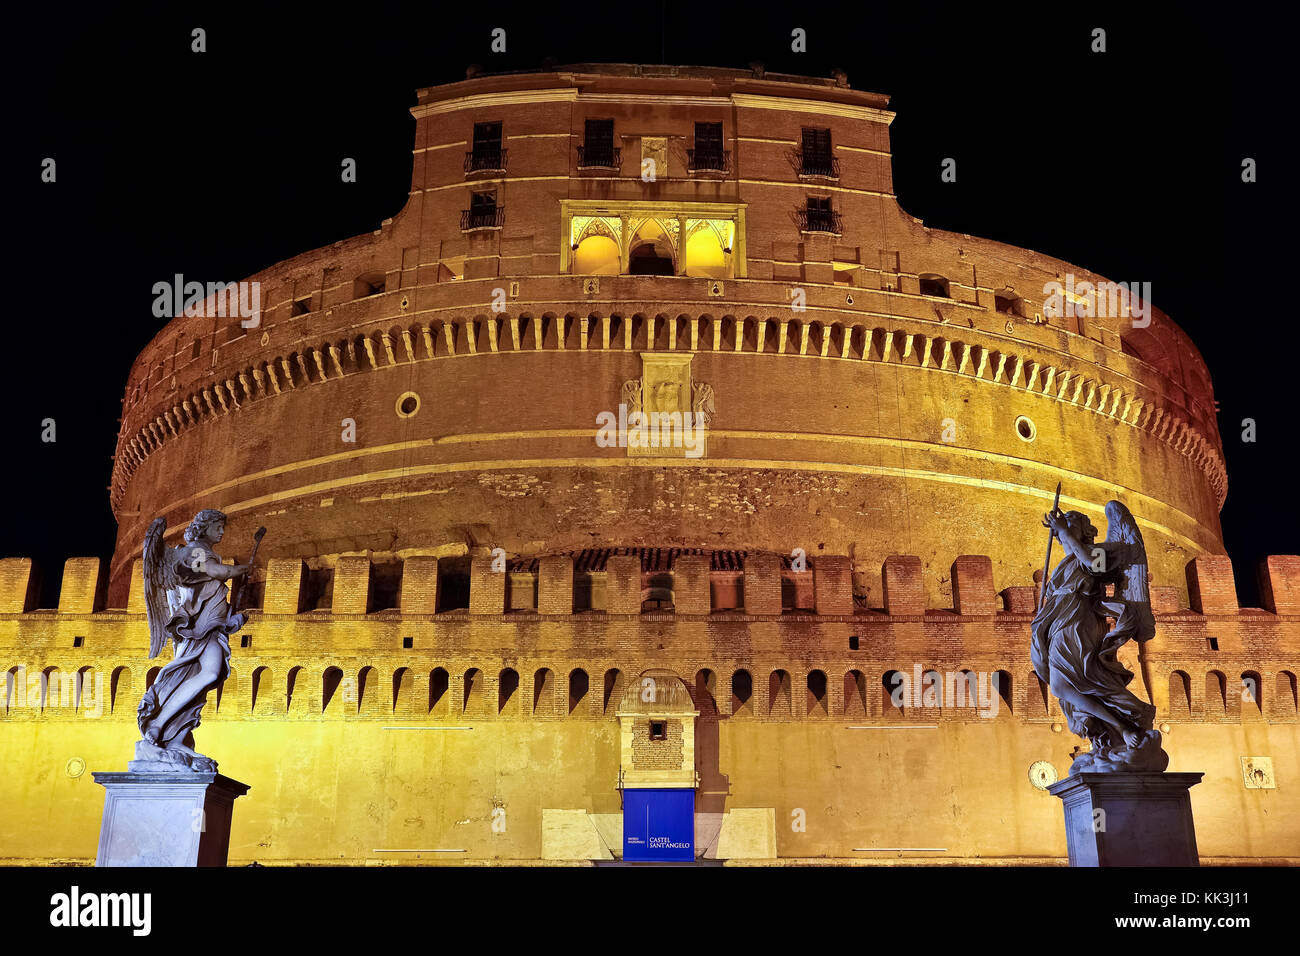 Castle of the Holy Angel, Holy Angel Castle Bridge, Mausoleum of Hadrian, National Museum. Illuminated, at night, low angle view. Rome, Europe, Italy Stock Photo